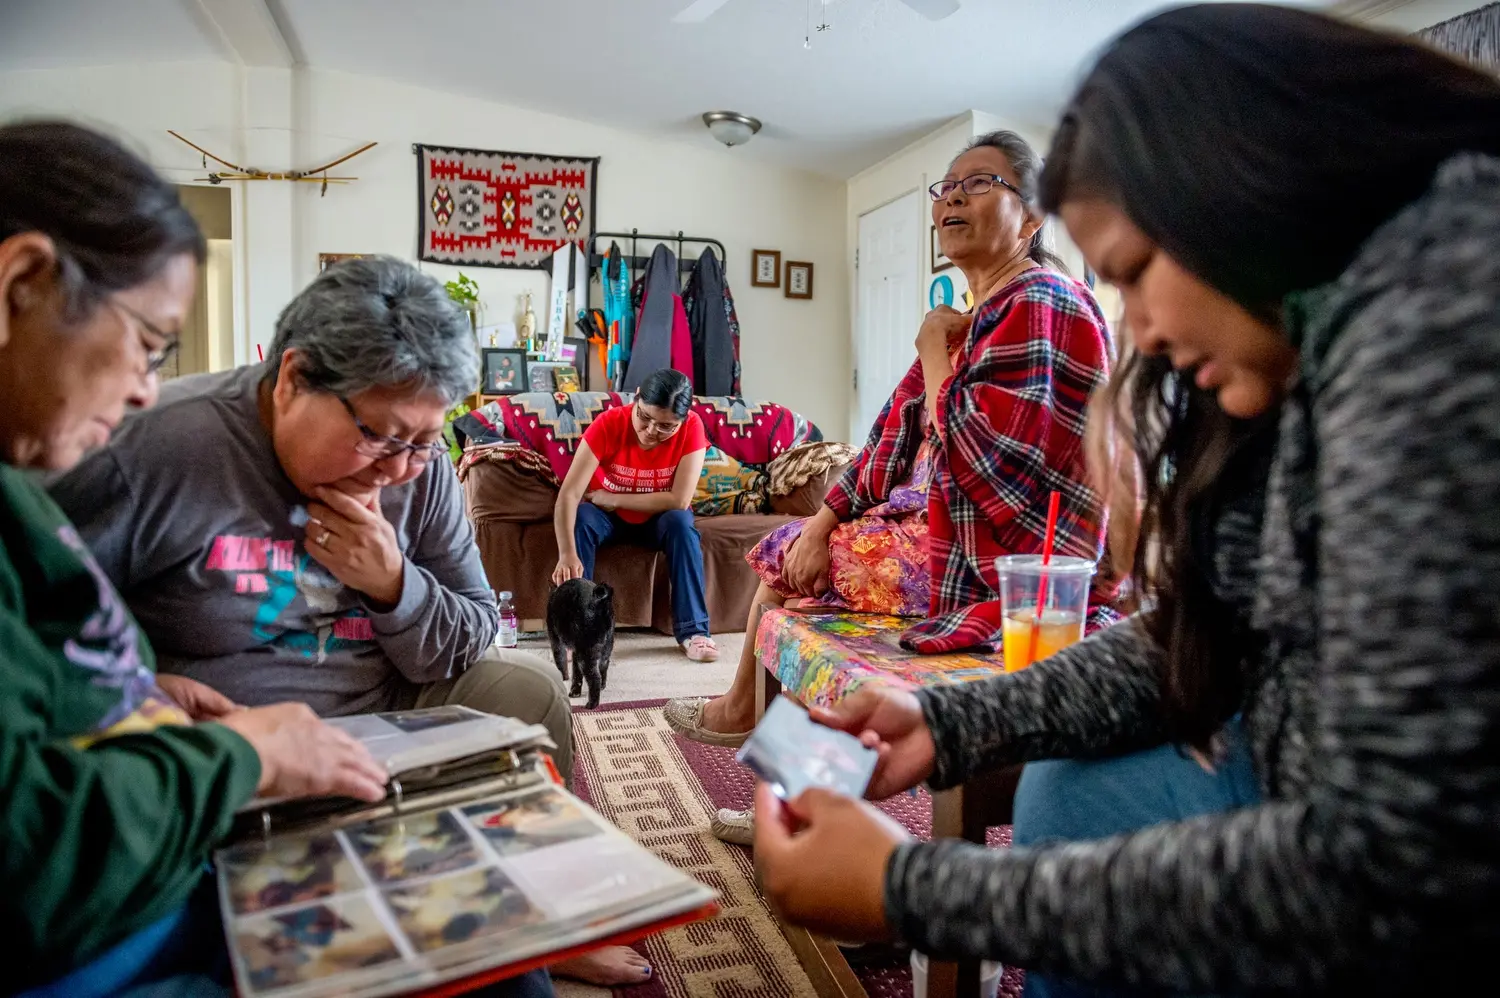 Linda Talker, Leona Begishie, Tara Begay and Carol Talker look at family photo albums at their home in Cameron, Ariz. Image by Mary F. Calvert. United States, 2020.